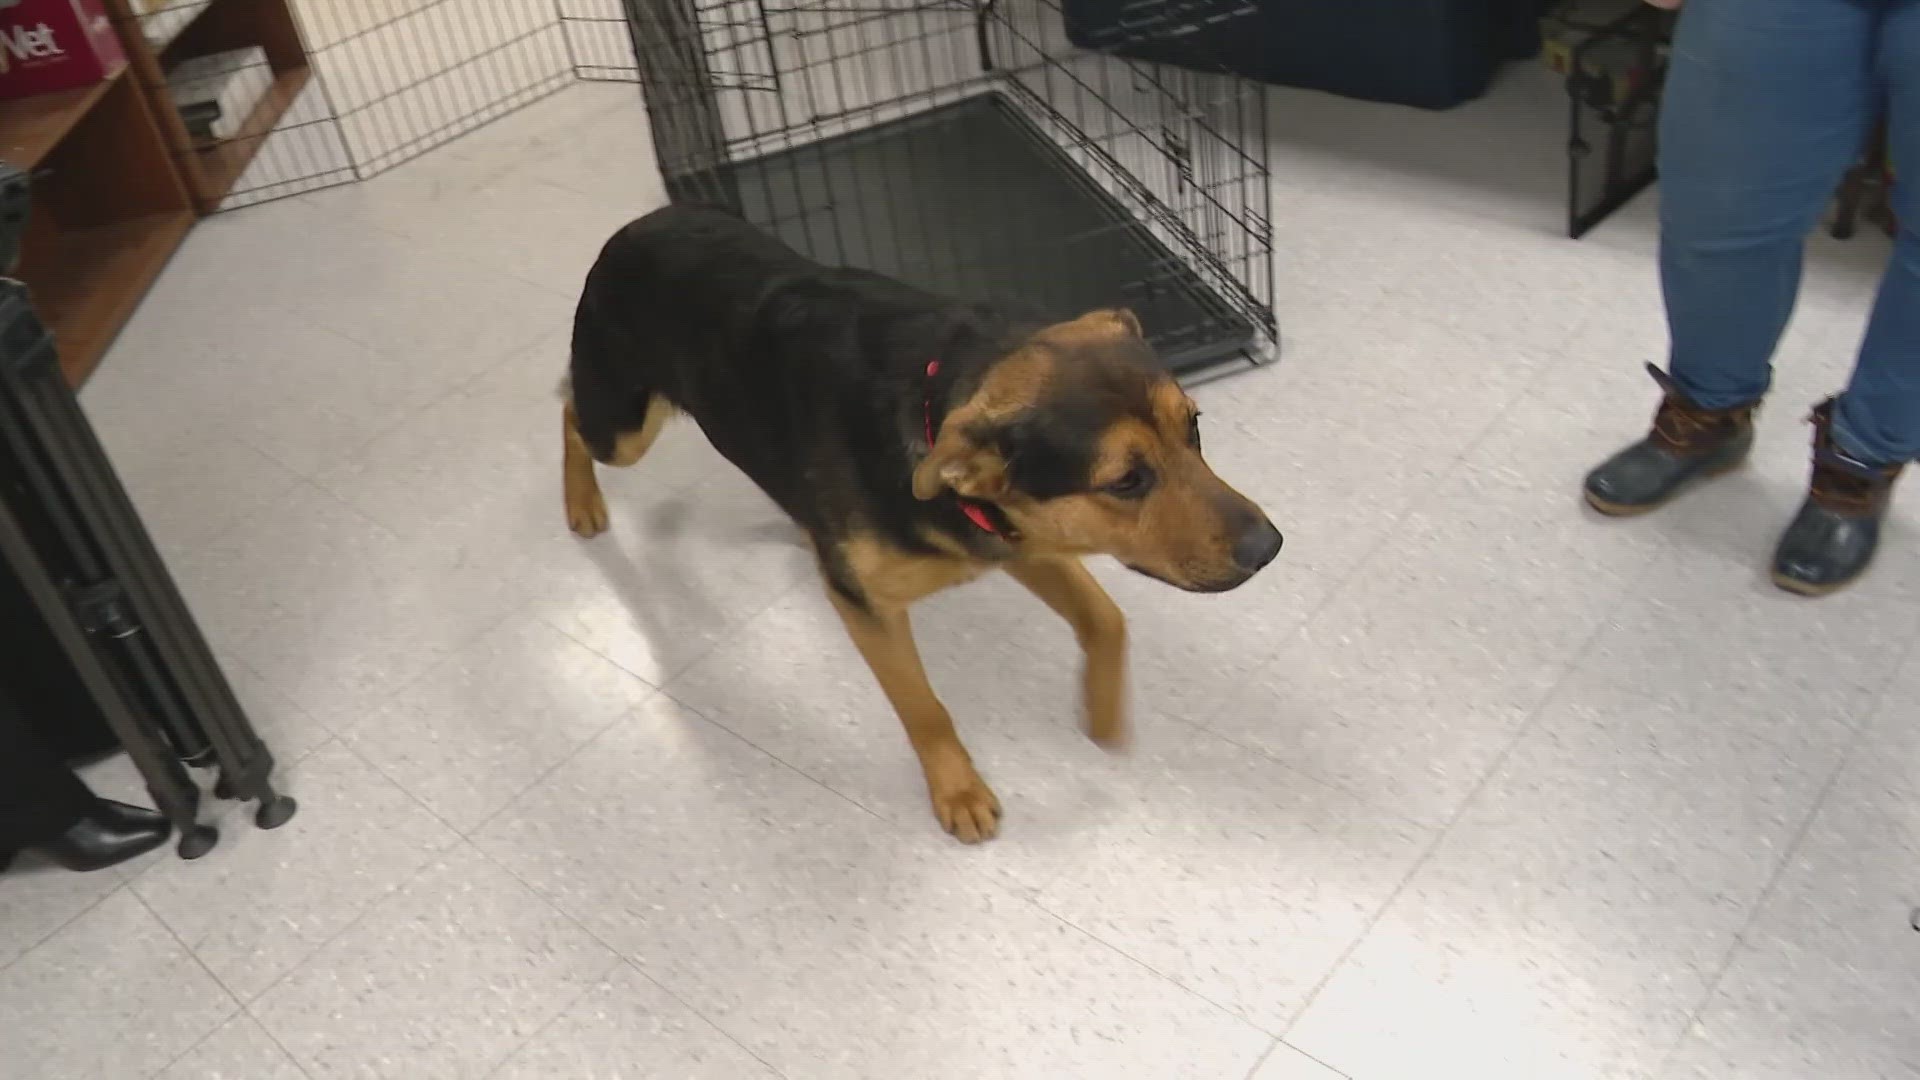 Indianapolis Animal Care Services said if dozens of animals aren't adopted this weekend, they could be forced to put dogs down.